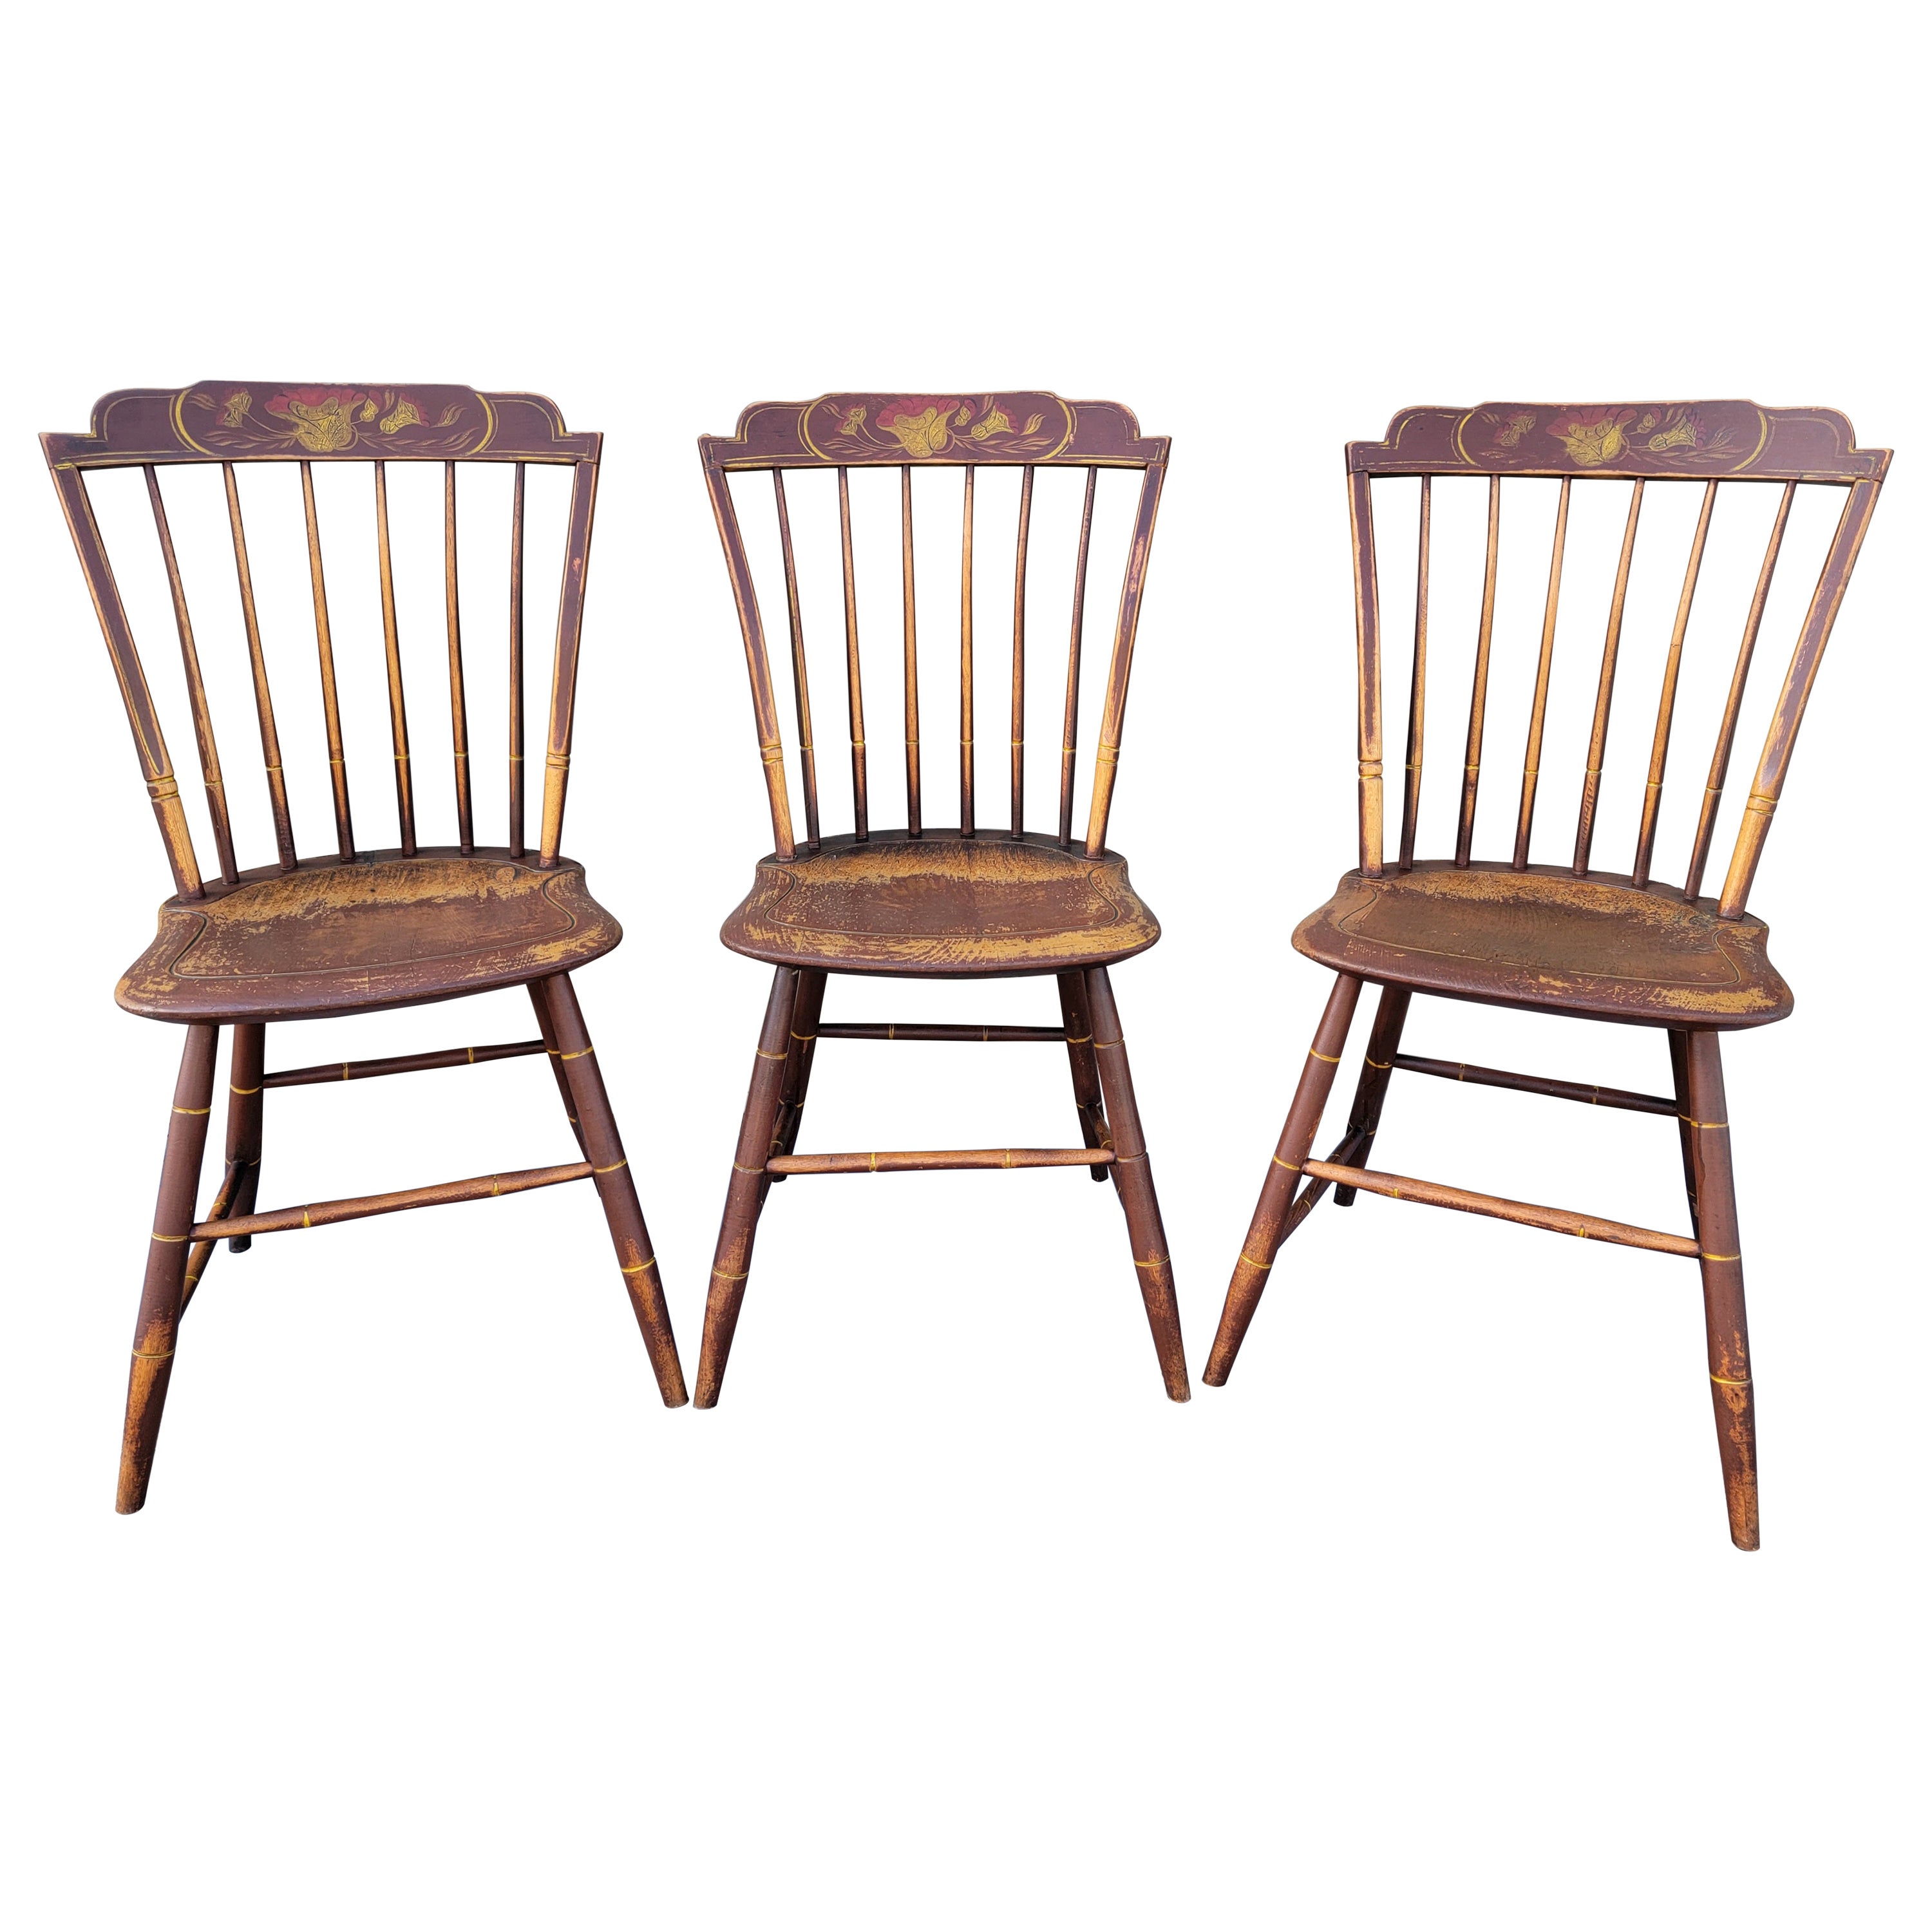 Early 19Thc Original Paint Decorated Windsor Chairs For Sale